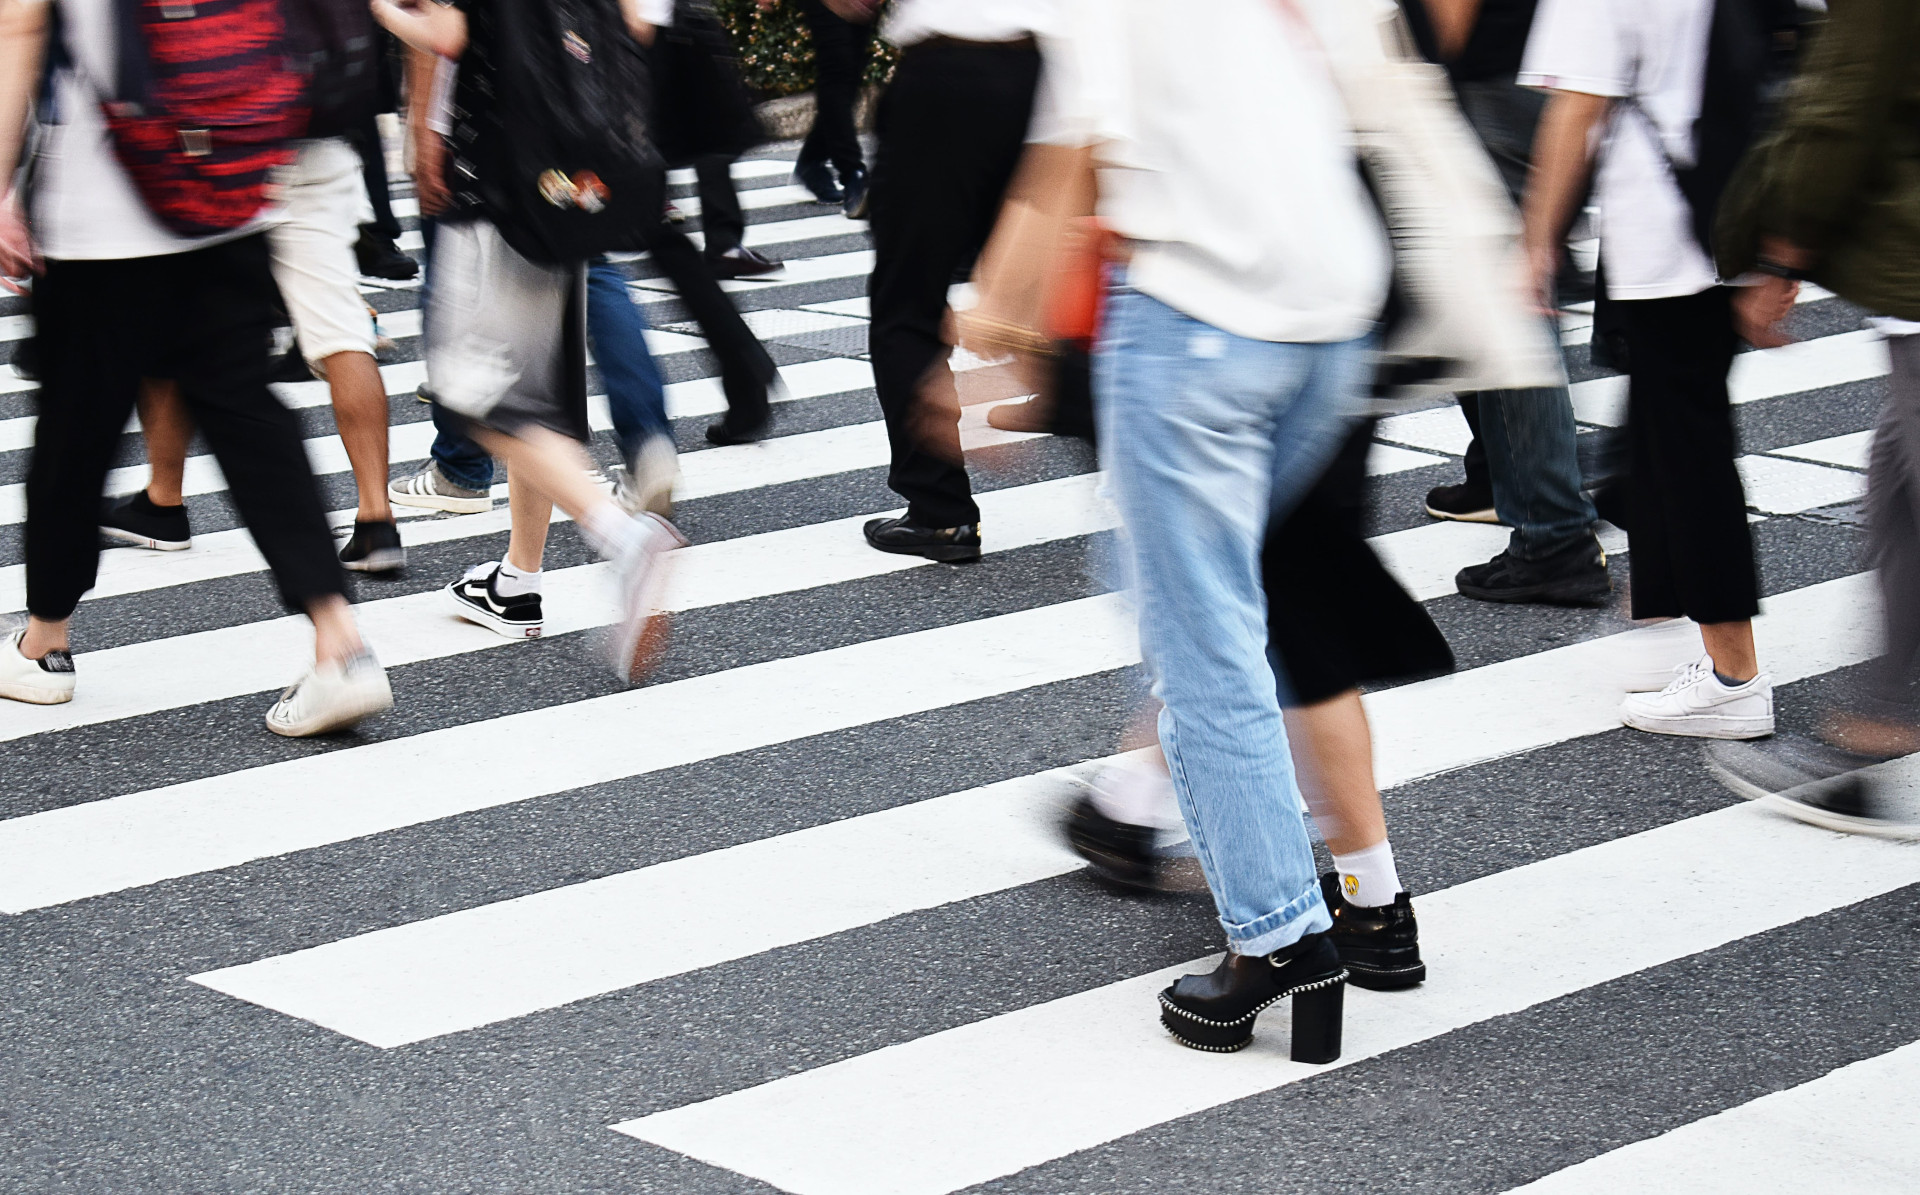 A crosswalk with black and white stripes used by a lot of pedestrians